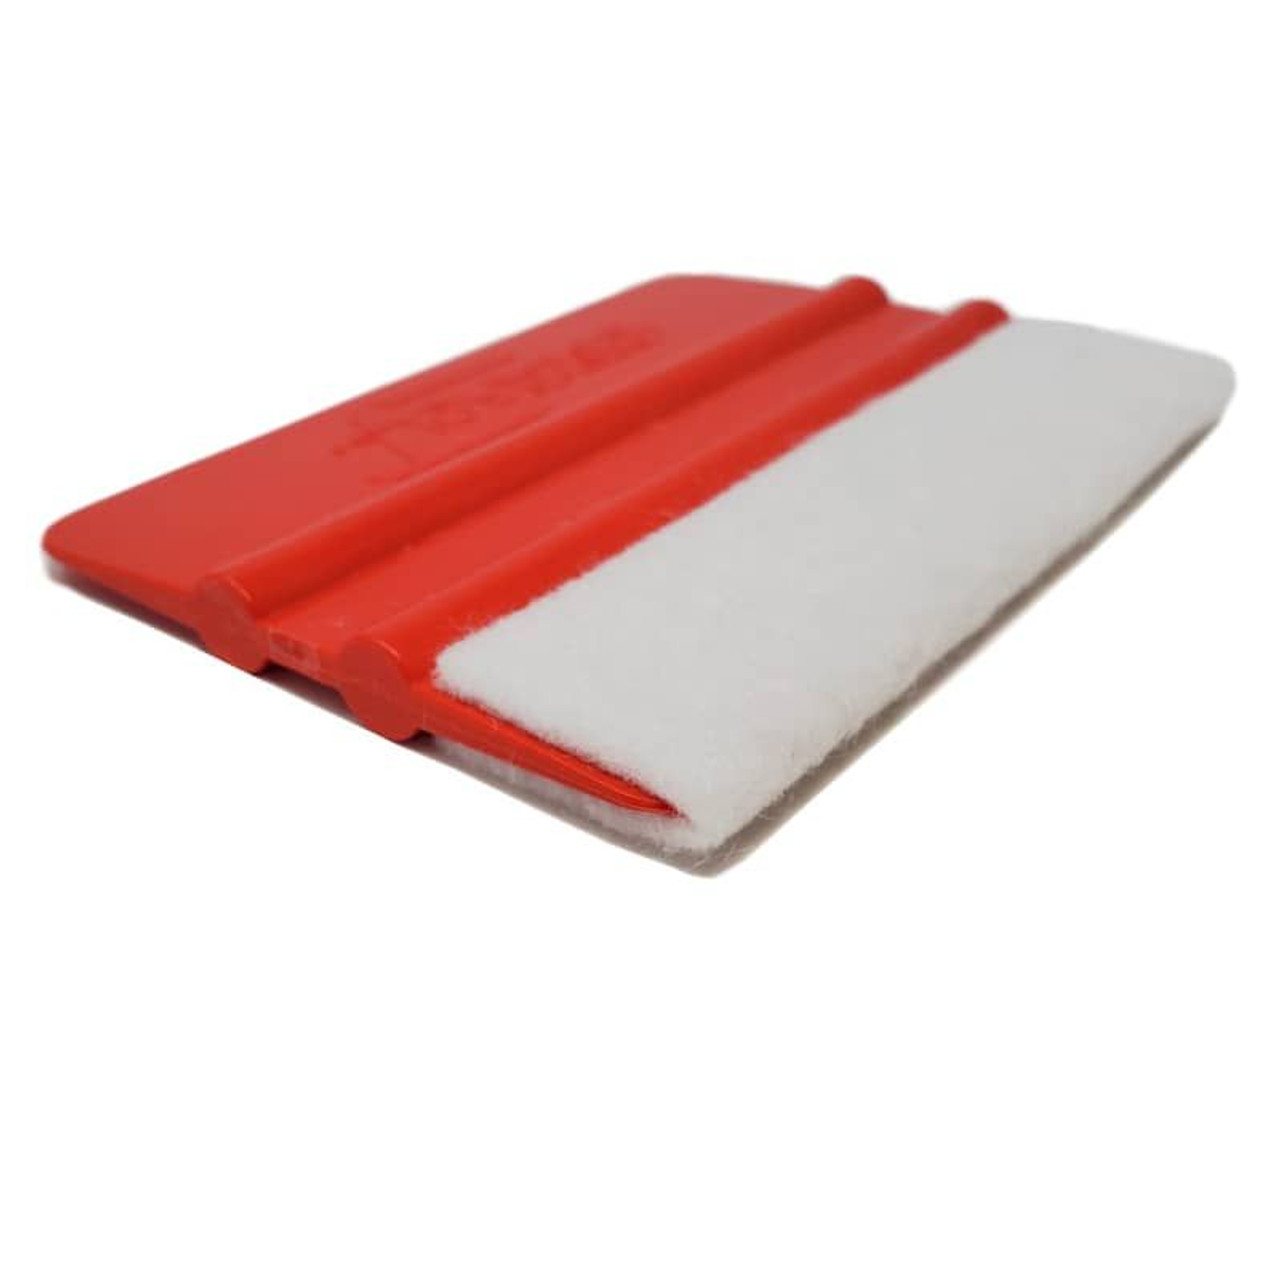 Oracal Red Feltwrap Squeegee